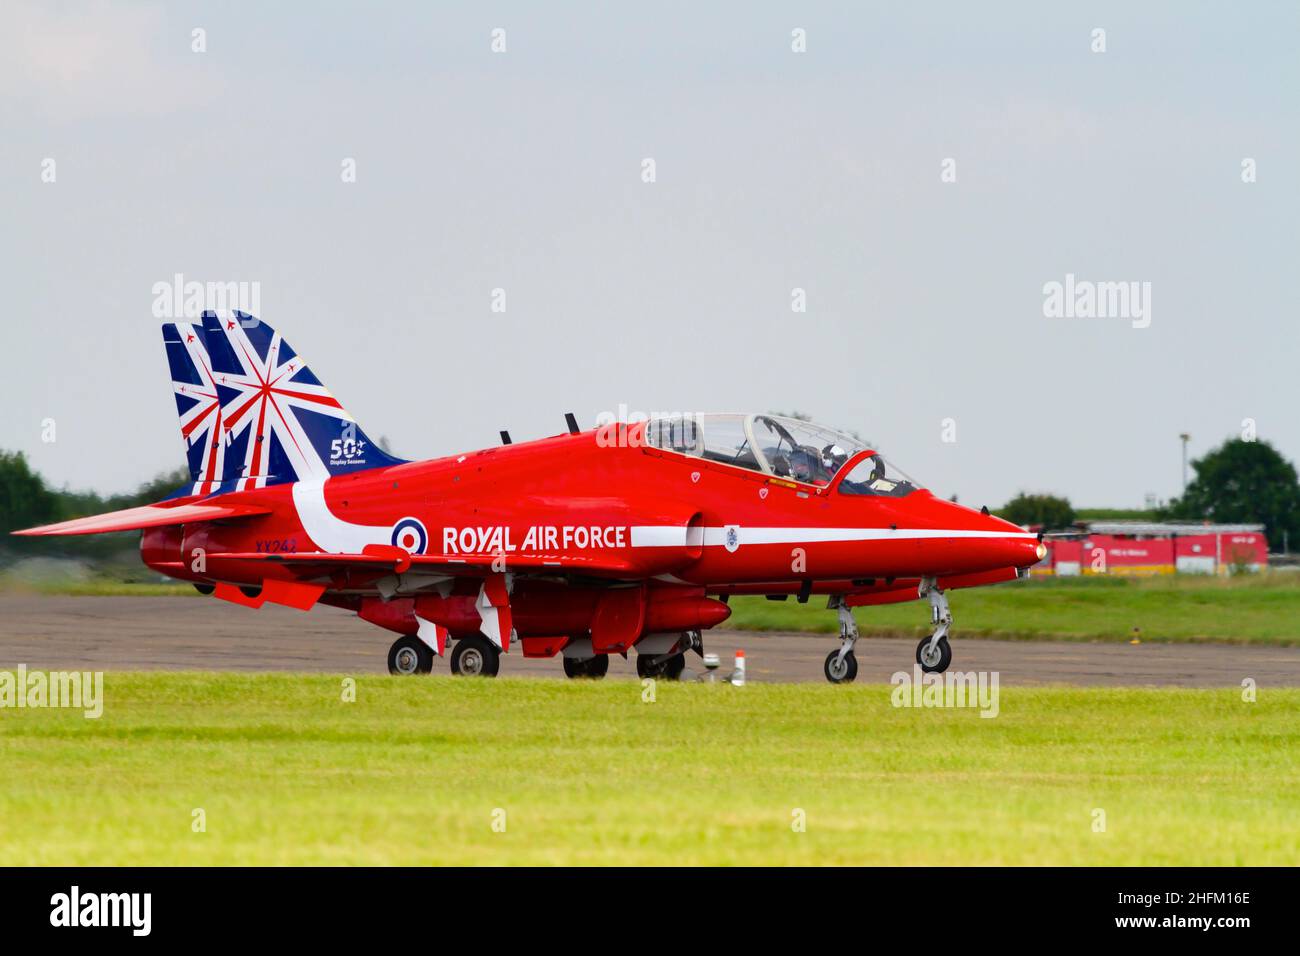 Two BAE Hawk T1a aircraft of the Royal Air Force aerobatic display team, The Red Arrows, with the 50th Anniversity tail markings. Accelerating to take Stock Photo